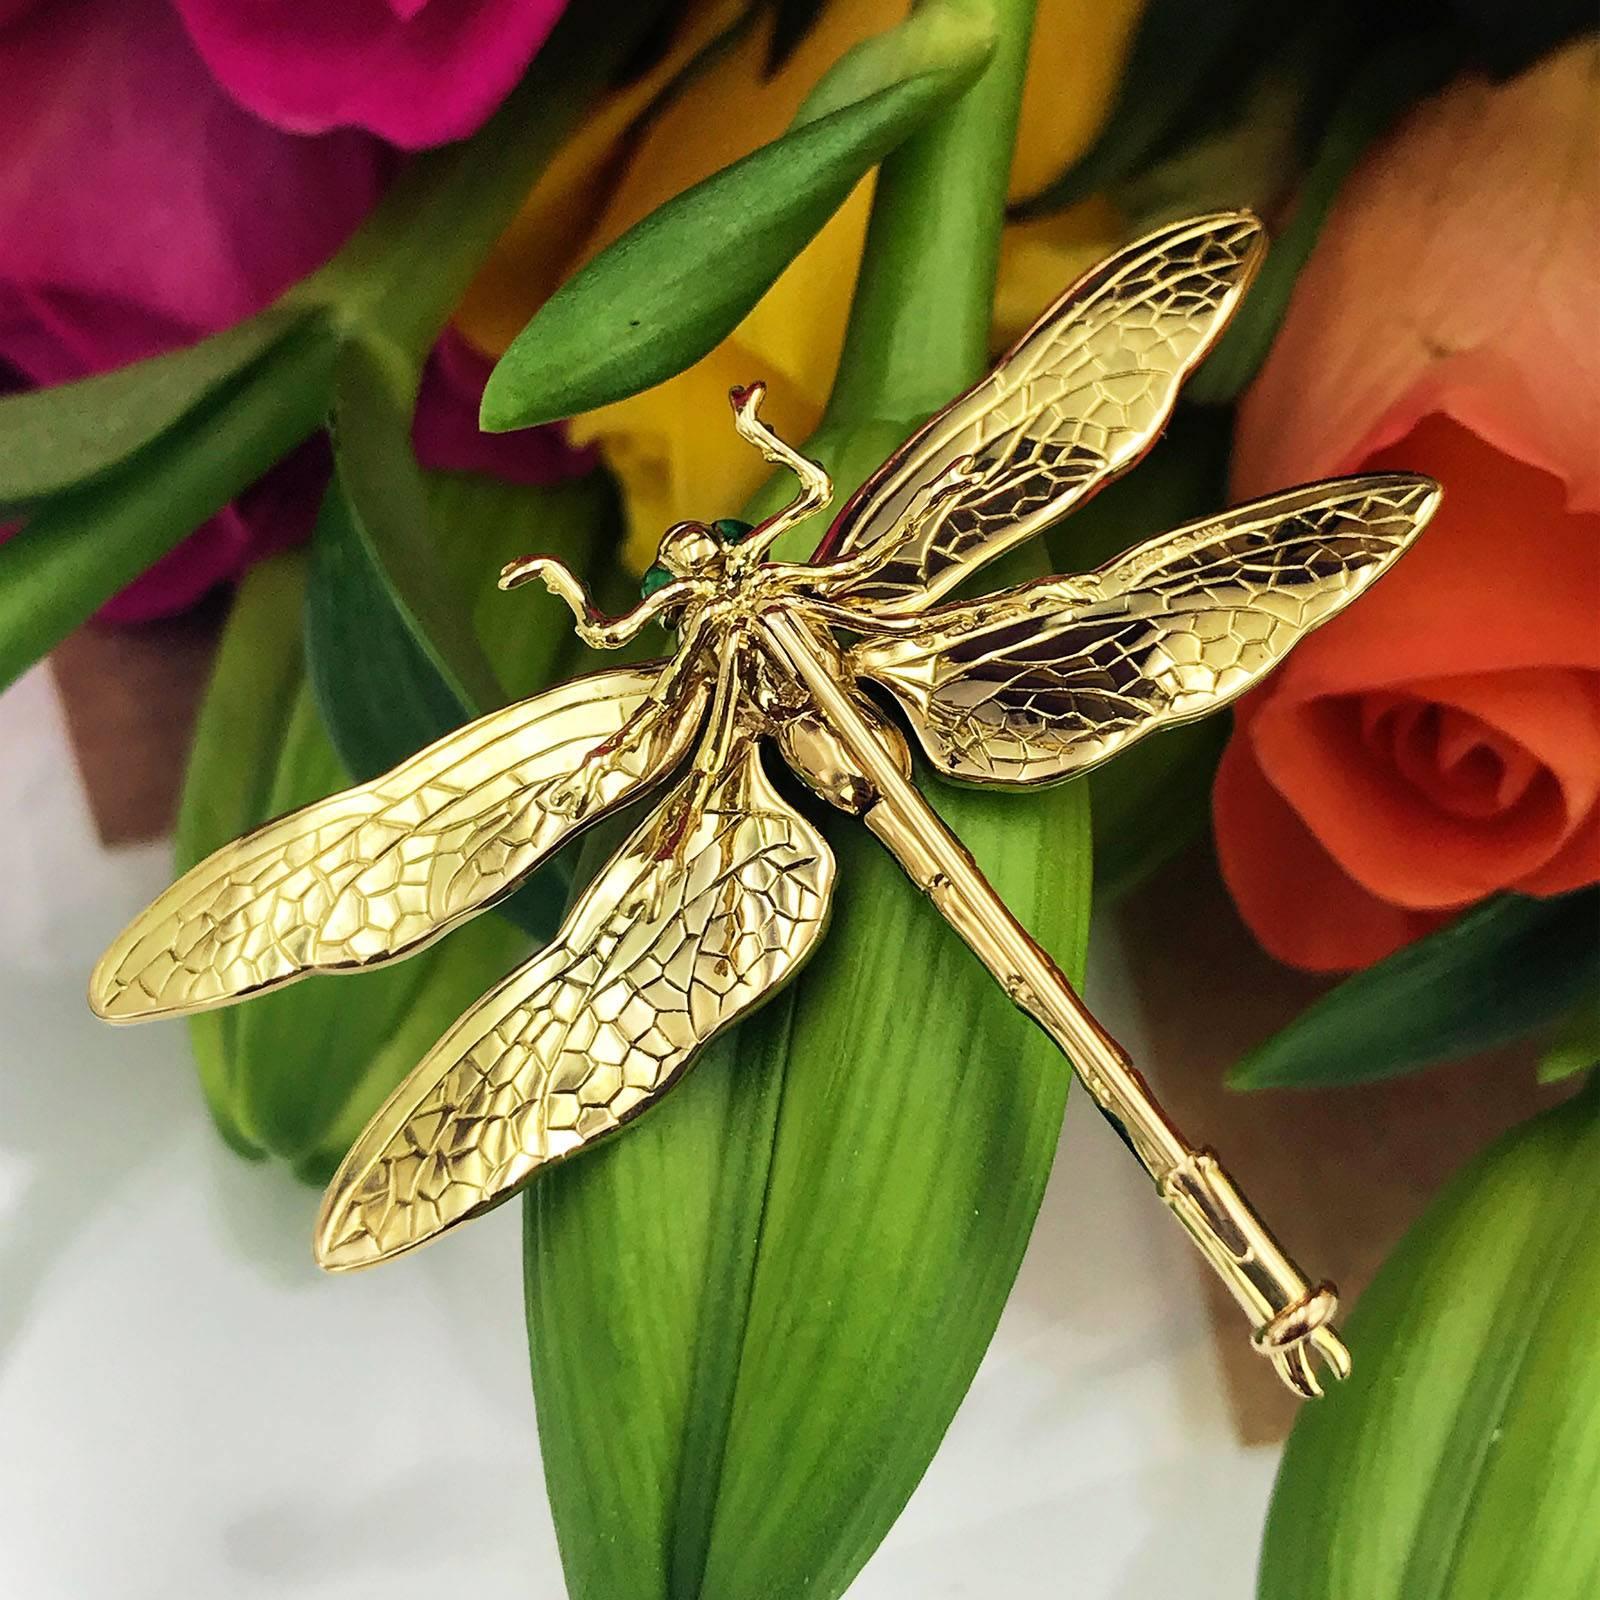 18k yellow gold antique style dragonfly brooch with green enamel wings, set with 0.48ct diamonds accents set in the torso and on the wings and 0.84ct cabochon green emerald body and enamel eyes. 